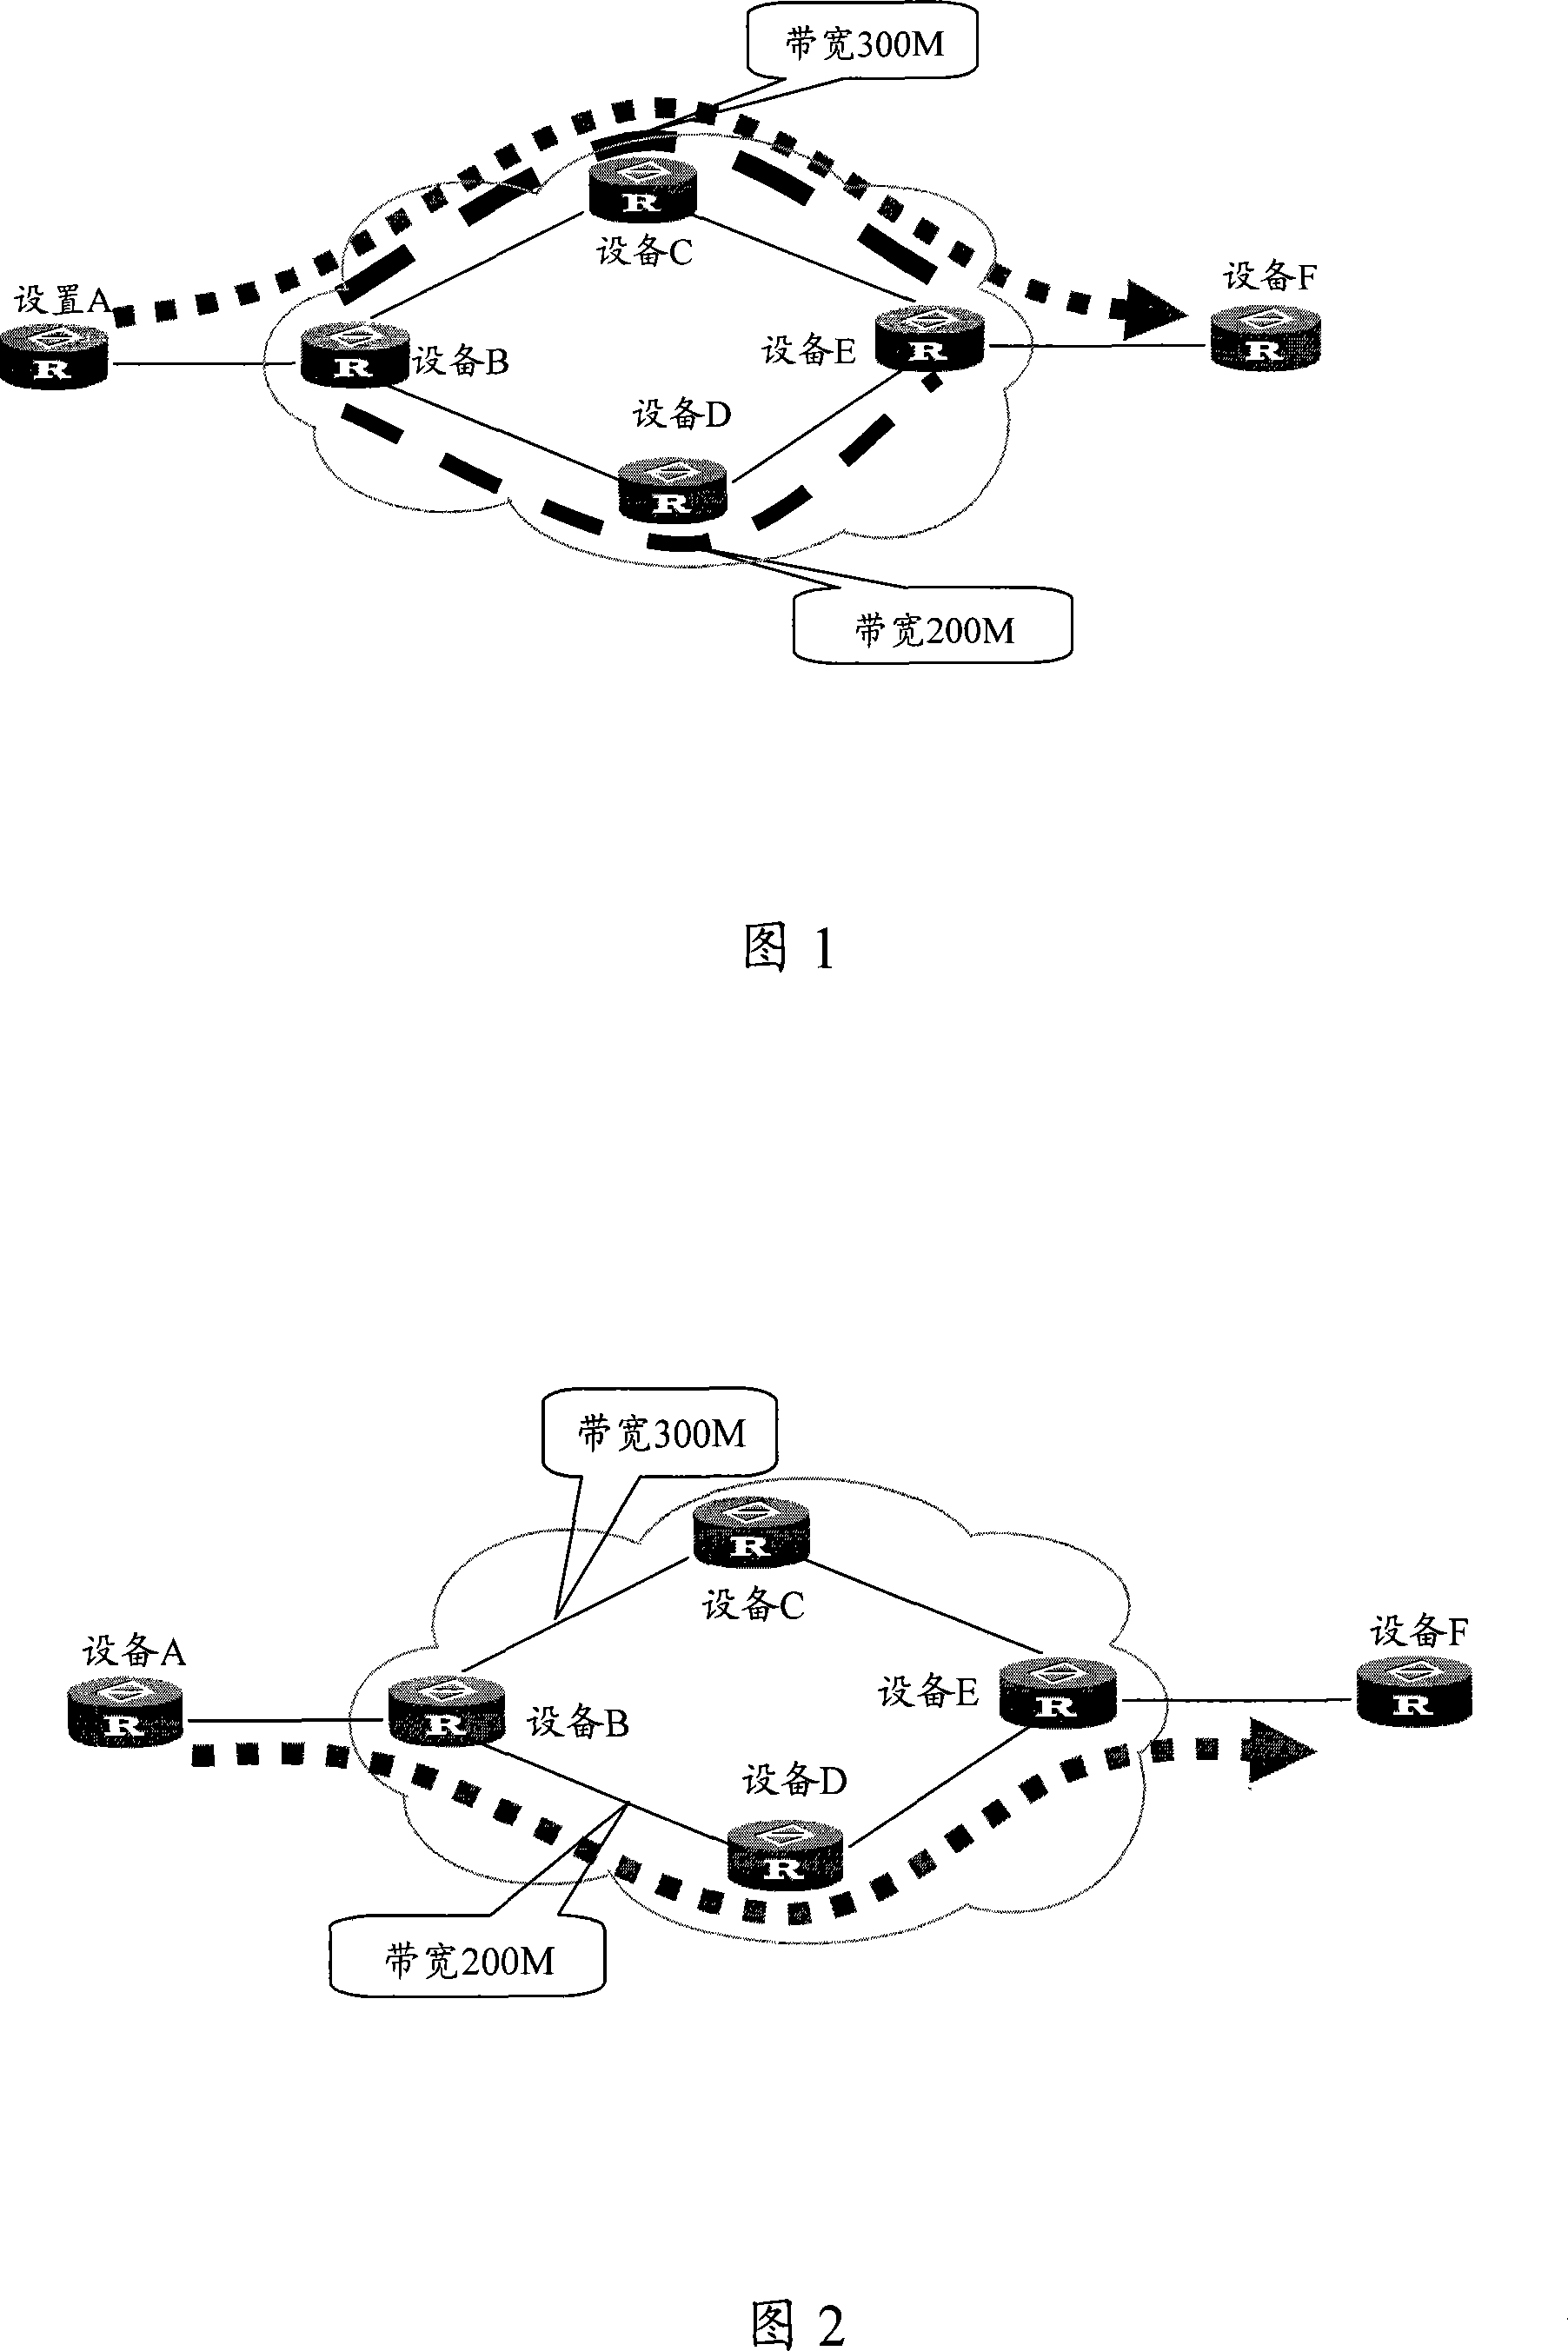 Service flow switching method and apparatus